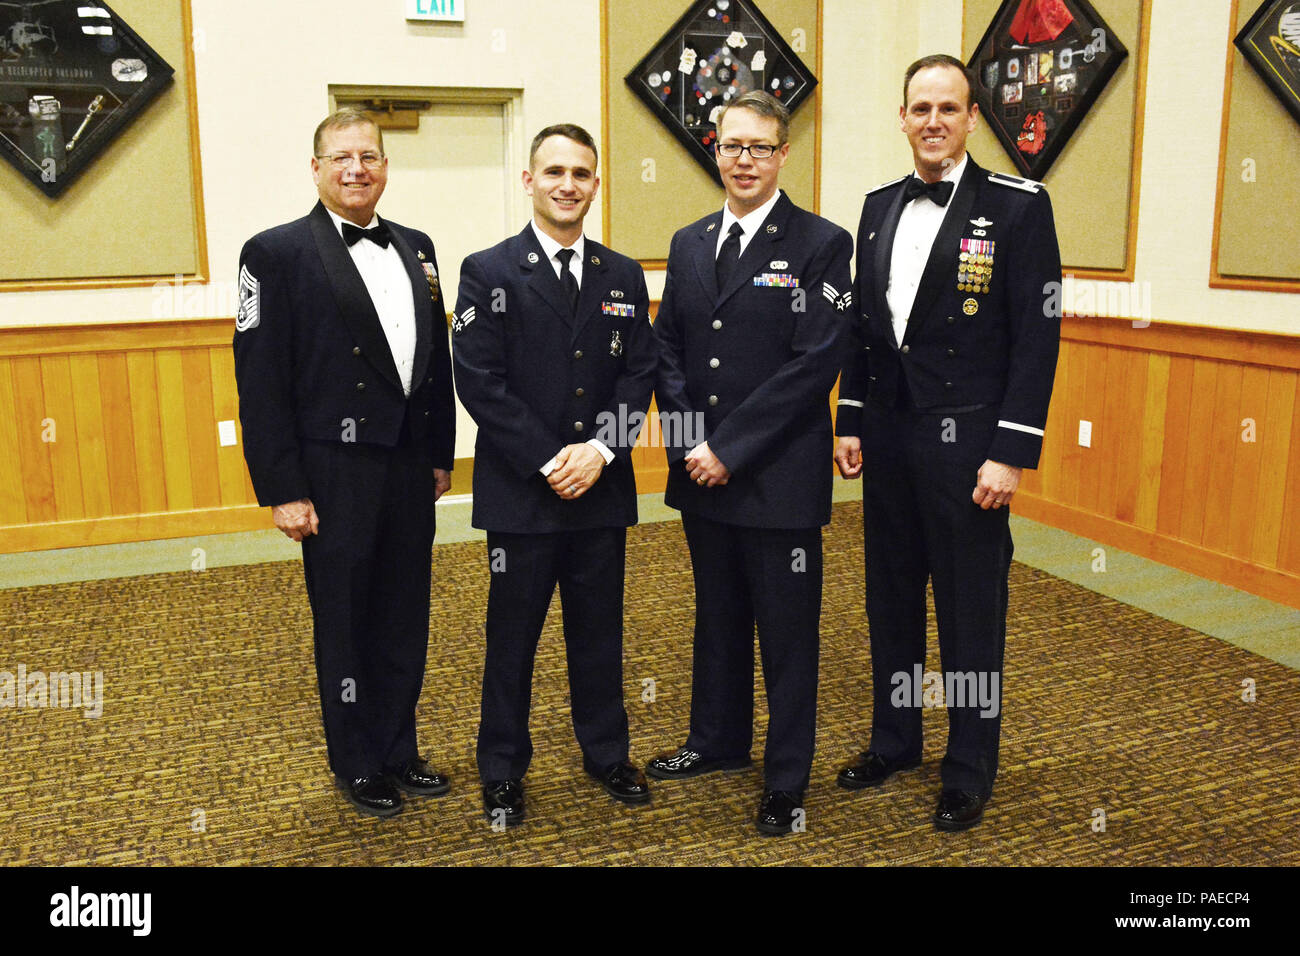 120th Airlift Wing Commander Col. Lee Smith (right) and the 120th Airlift Wing Command Chief, Chief Master Sgt. Steven Lynch (left), stand with the wing’s newest Airman Leadership School graduates (center left to right), Senior Airman Nicholaus Schwall and Senior Airman Nikolas Asmussen, following their graduation ceremony held at Malmstrom Air Force Base, Mont., March 22, 2016. (U.S. Air National Guard photo by Senior Master Sgt. Eric Peterson) Stock Photo